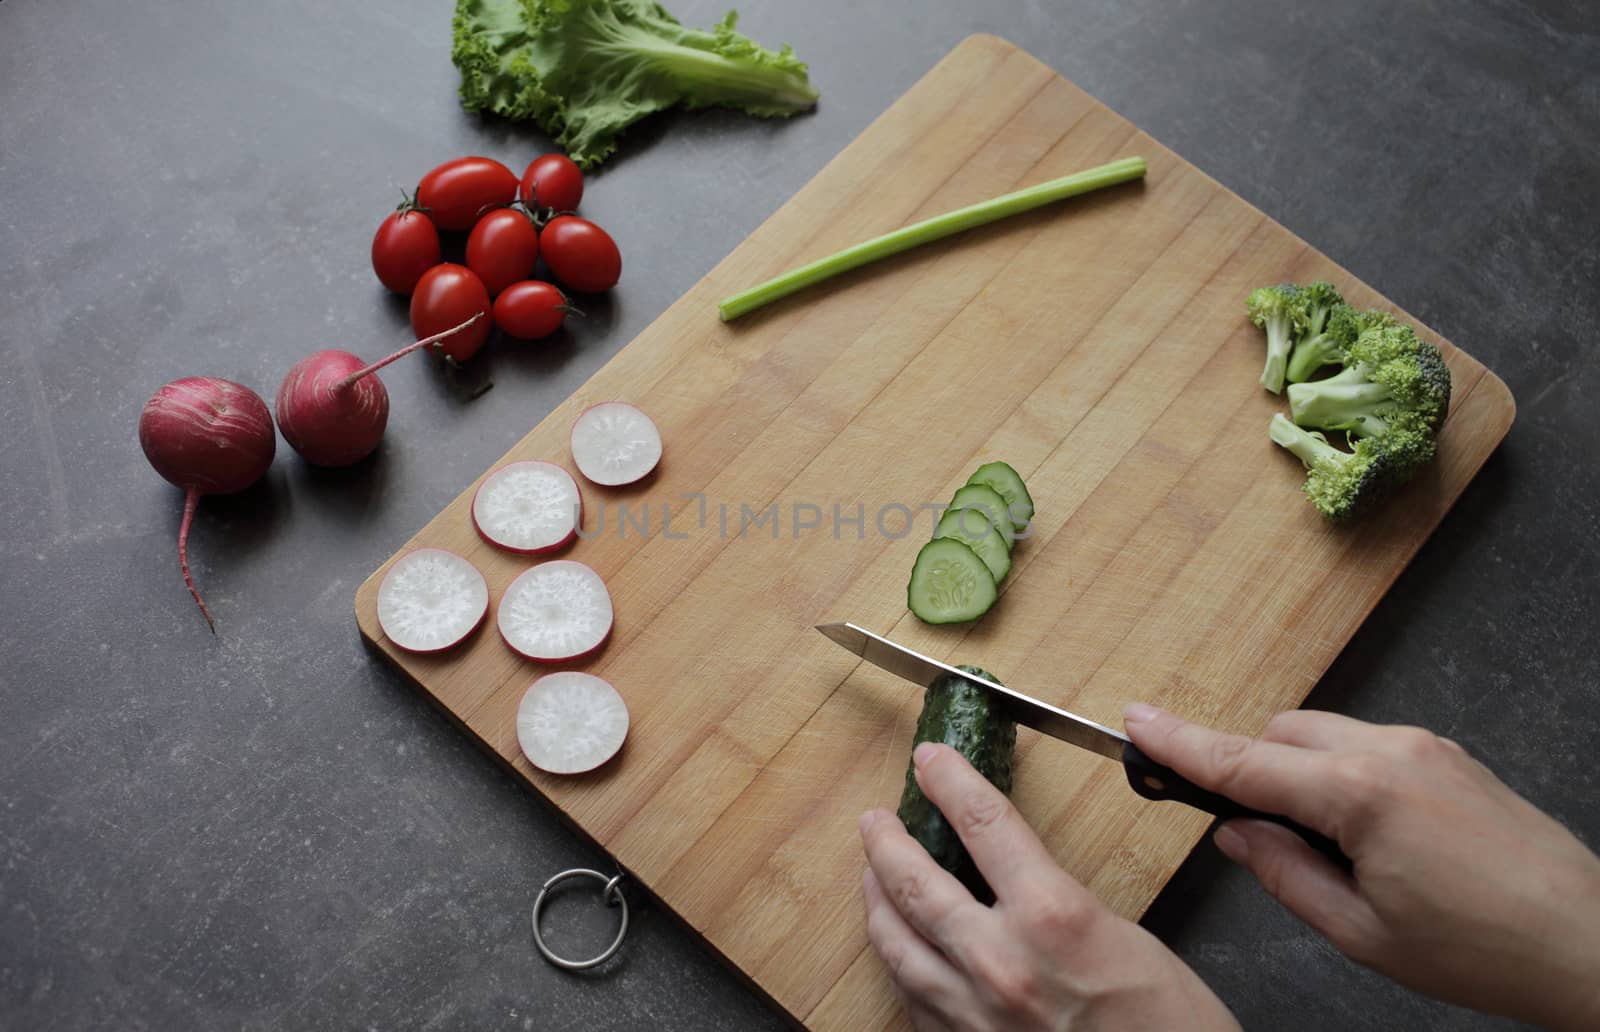 Hands cut cucumber on a cutting board on a gray table. Fresh vegetables, tomatoes, lettuce, broccoli, radishes lie nearby